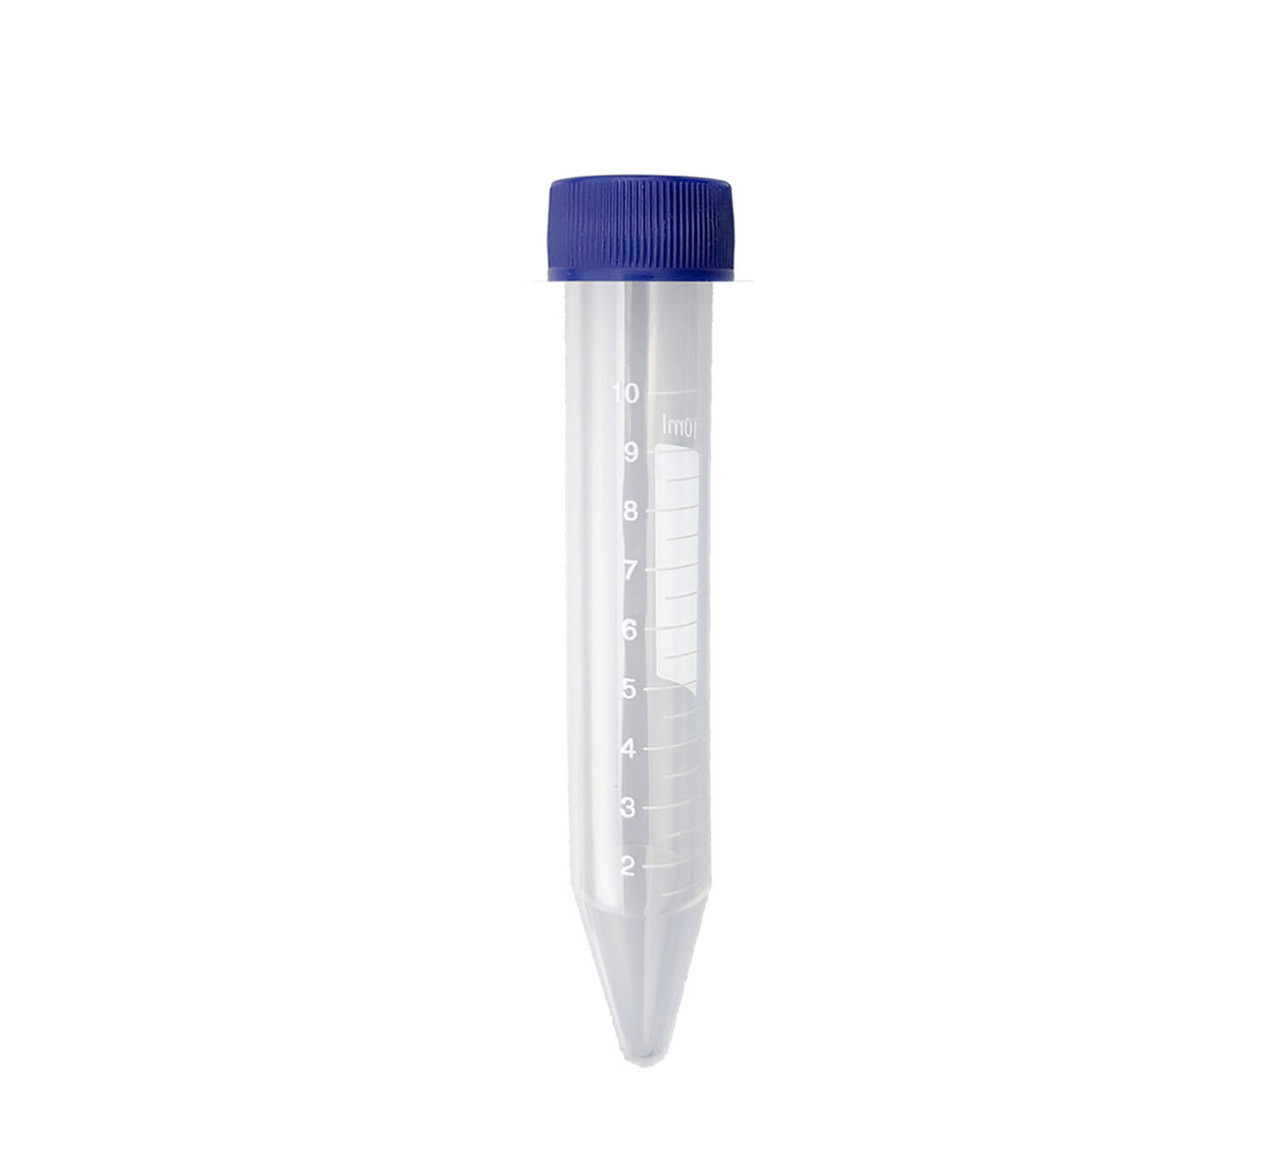 Nunc EZ Fip 15ml and 50ml Conical Tube. Life Science Products